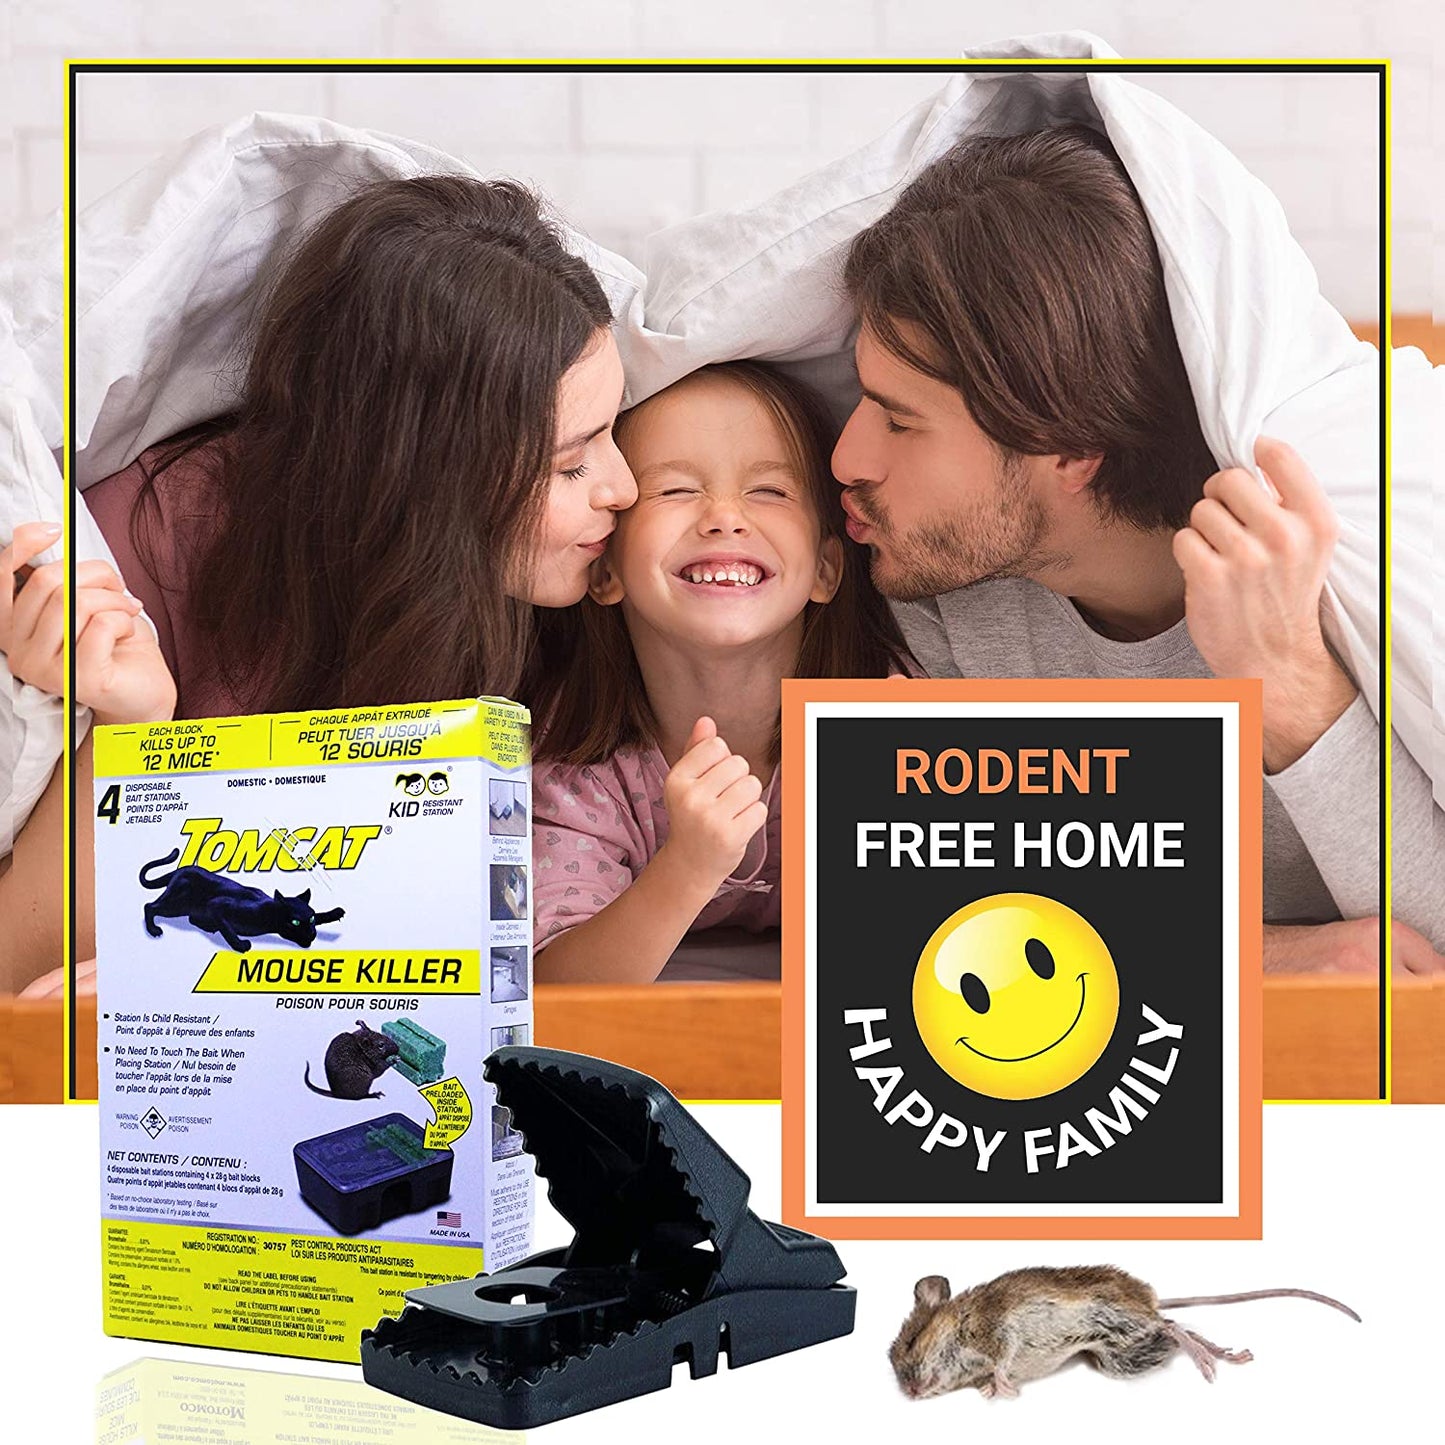 Mouse Rodent Rat Poison Trap Killer-Child and Dog Resistant-Disposable 4 pack stations